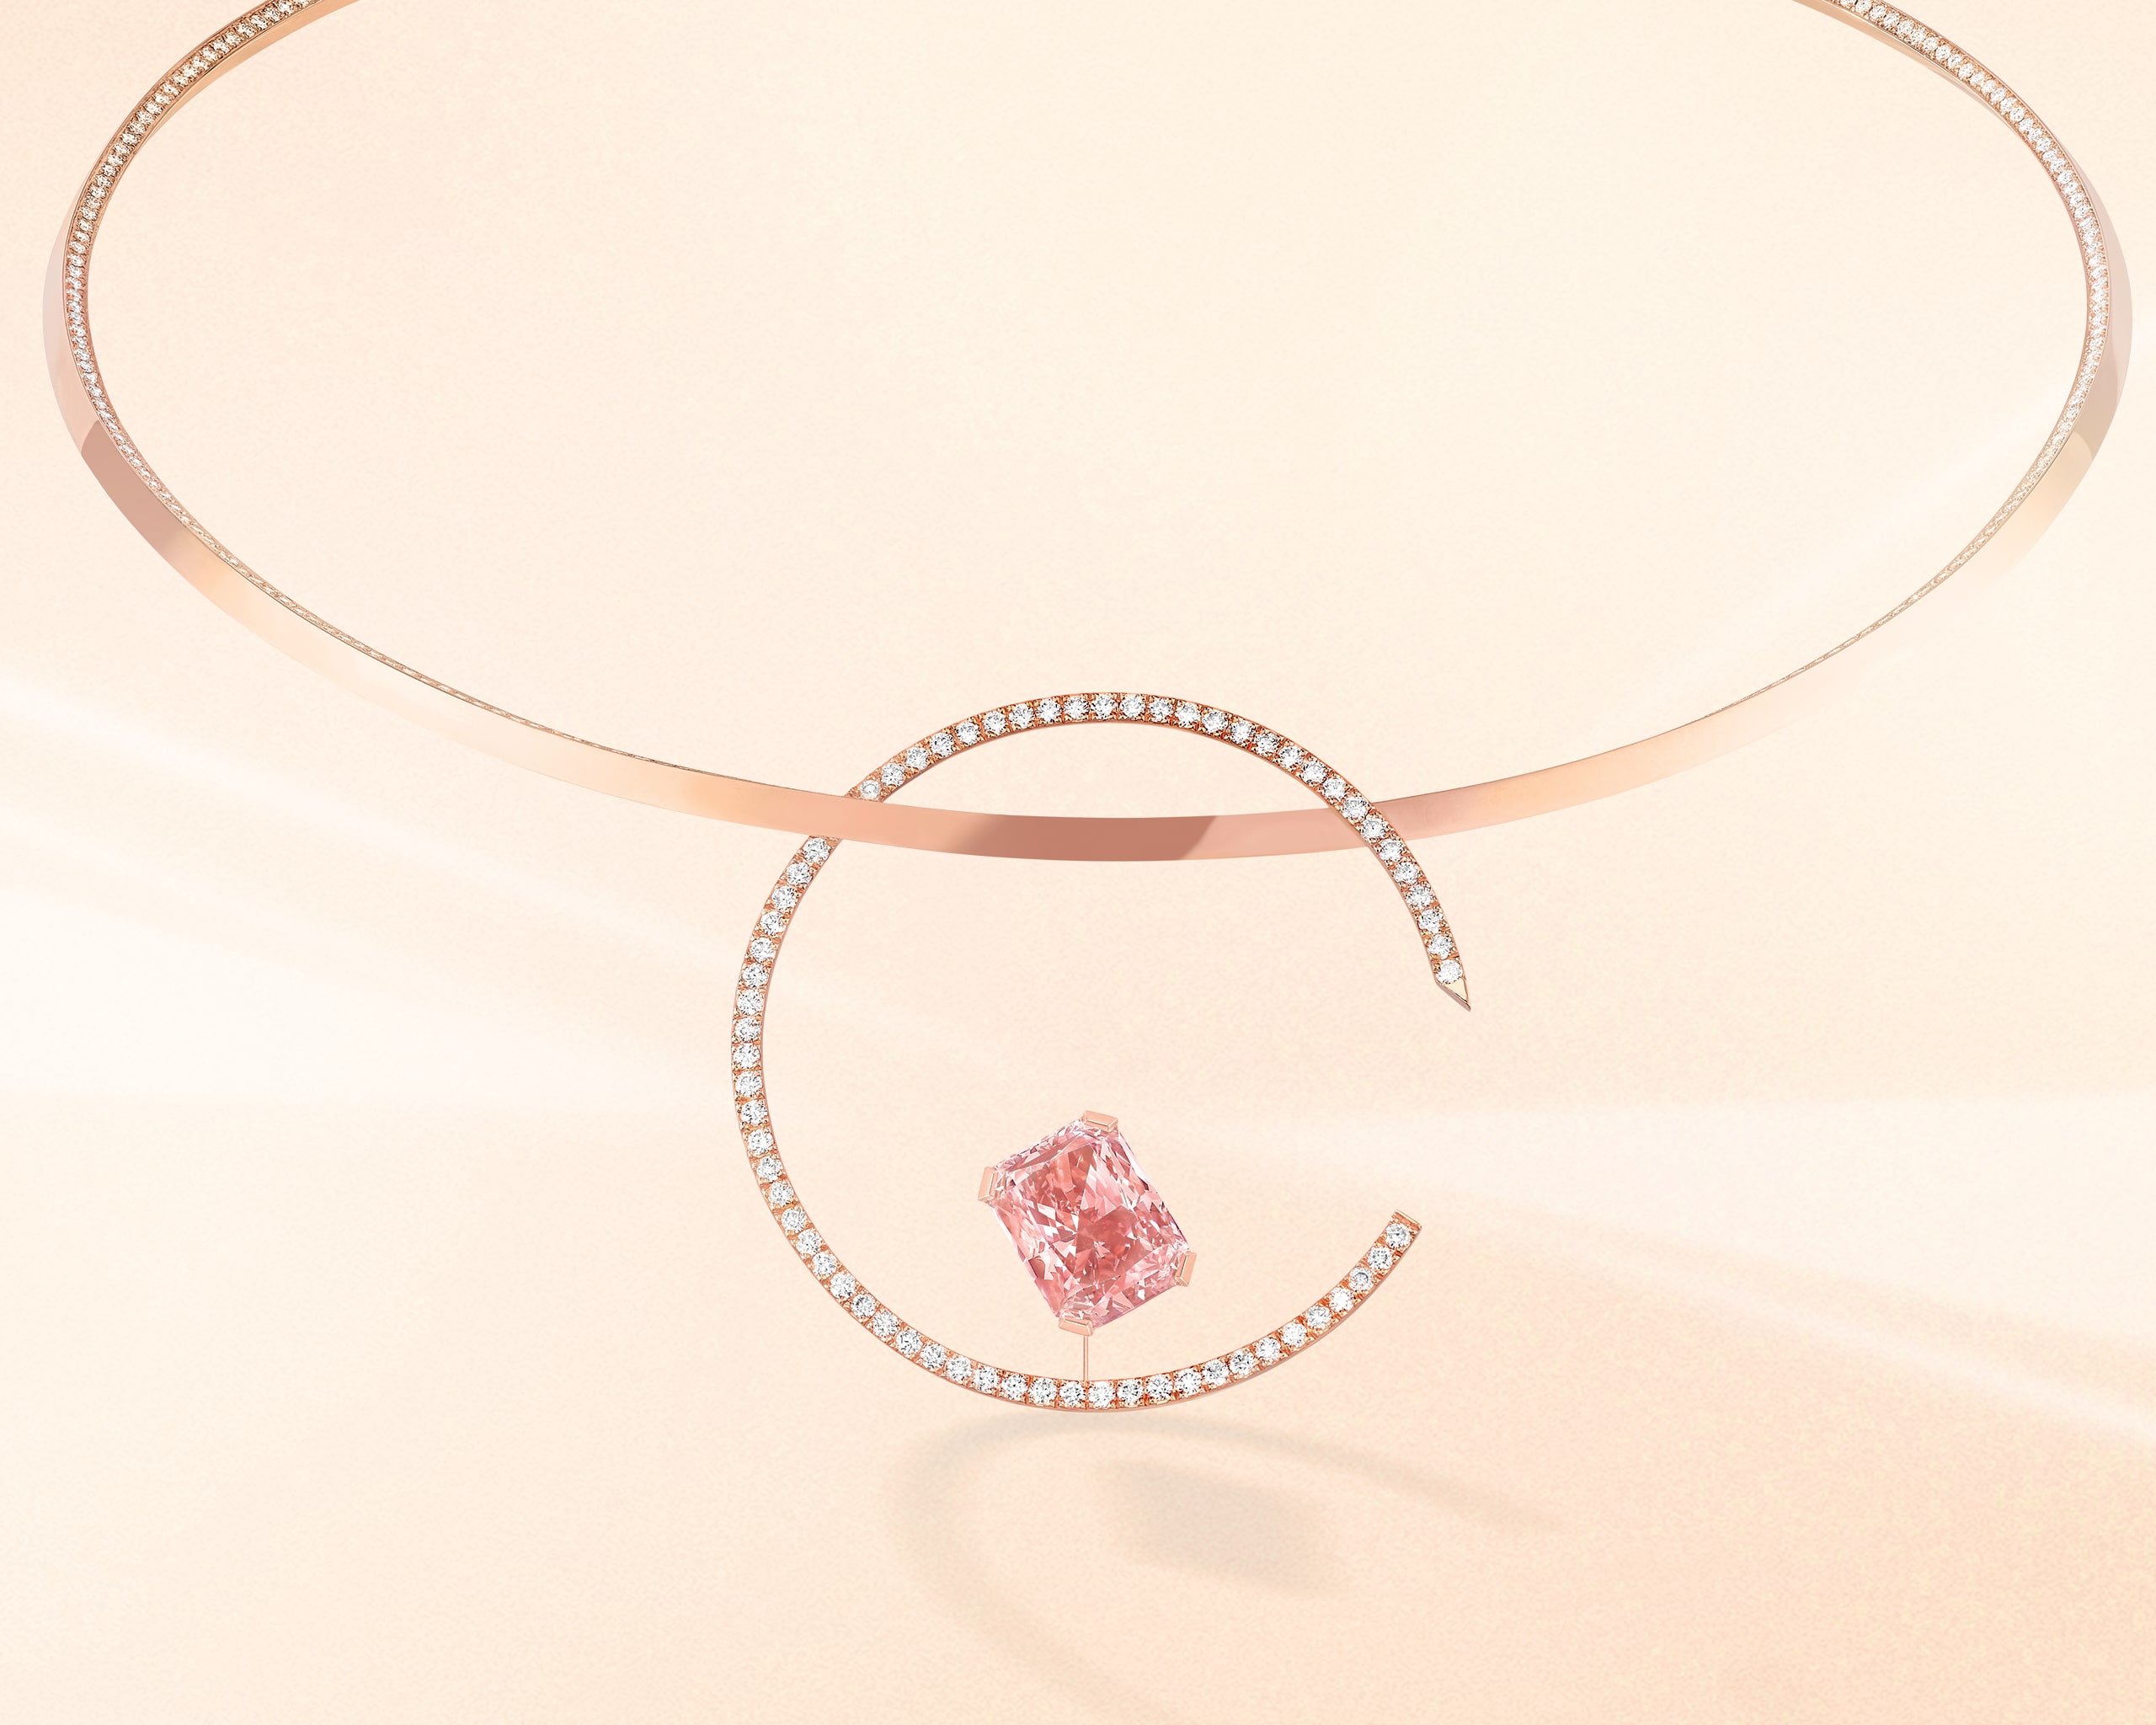 Rose gold diamond choker necklace with asymmetric fancy pink radiant cut diamond and accenting diamonds from Messika